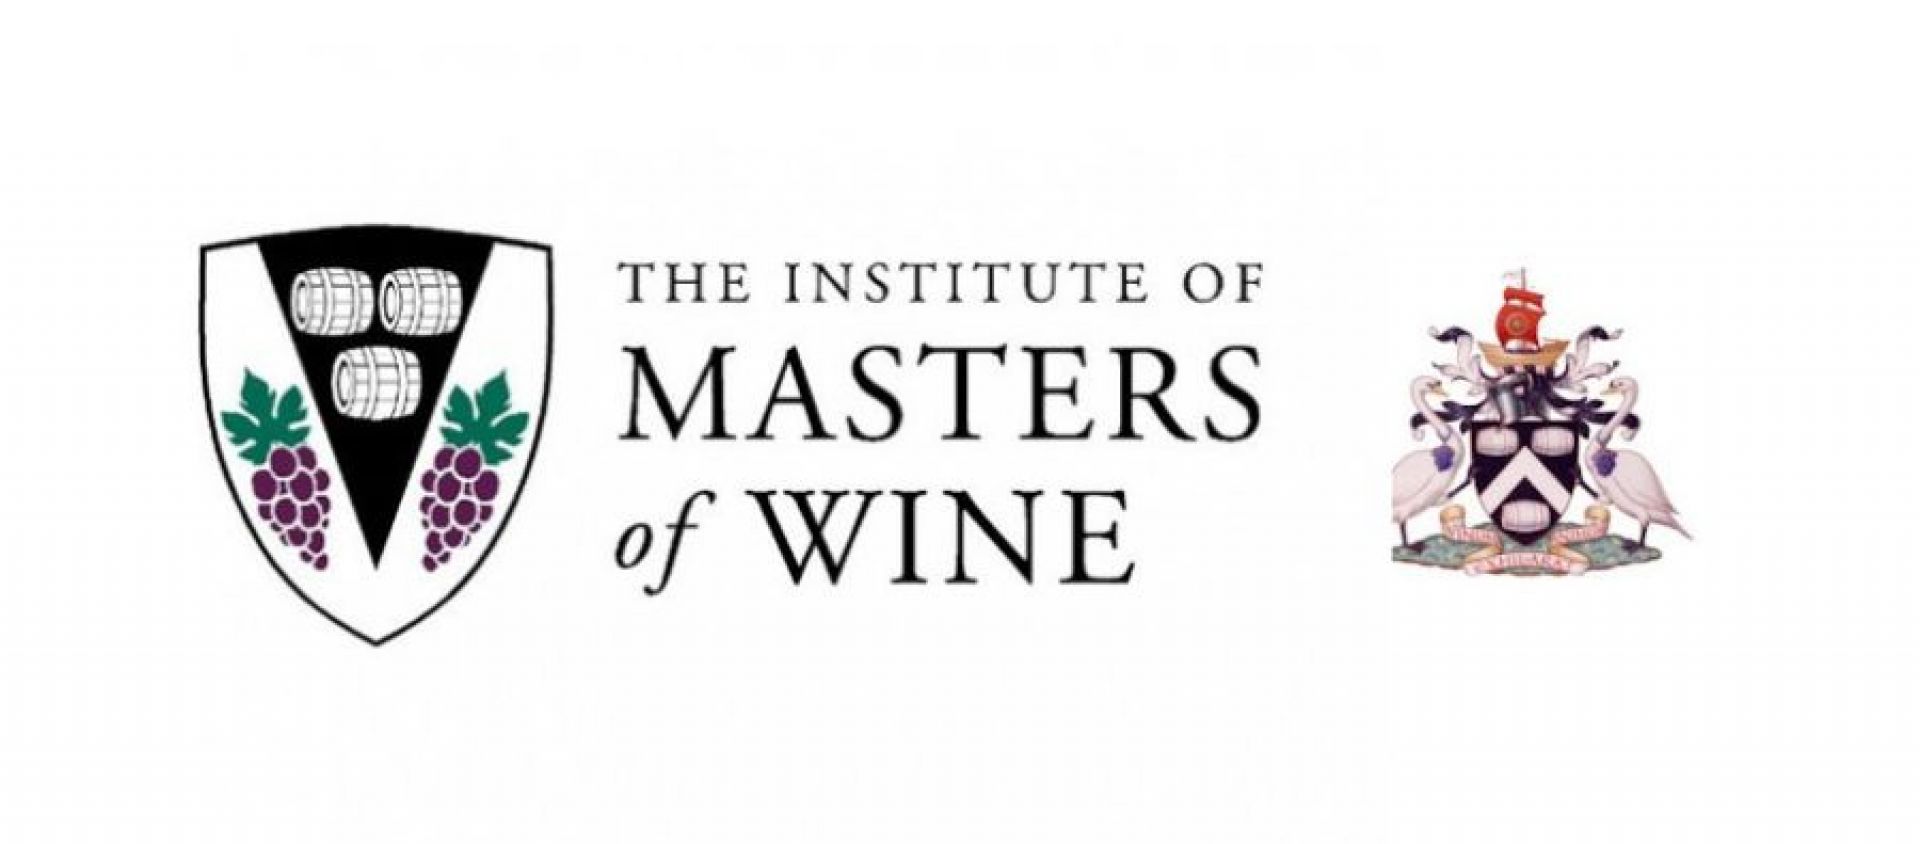 Photo for: How to become a Master of Wine